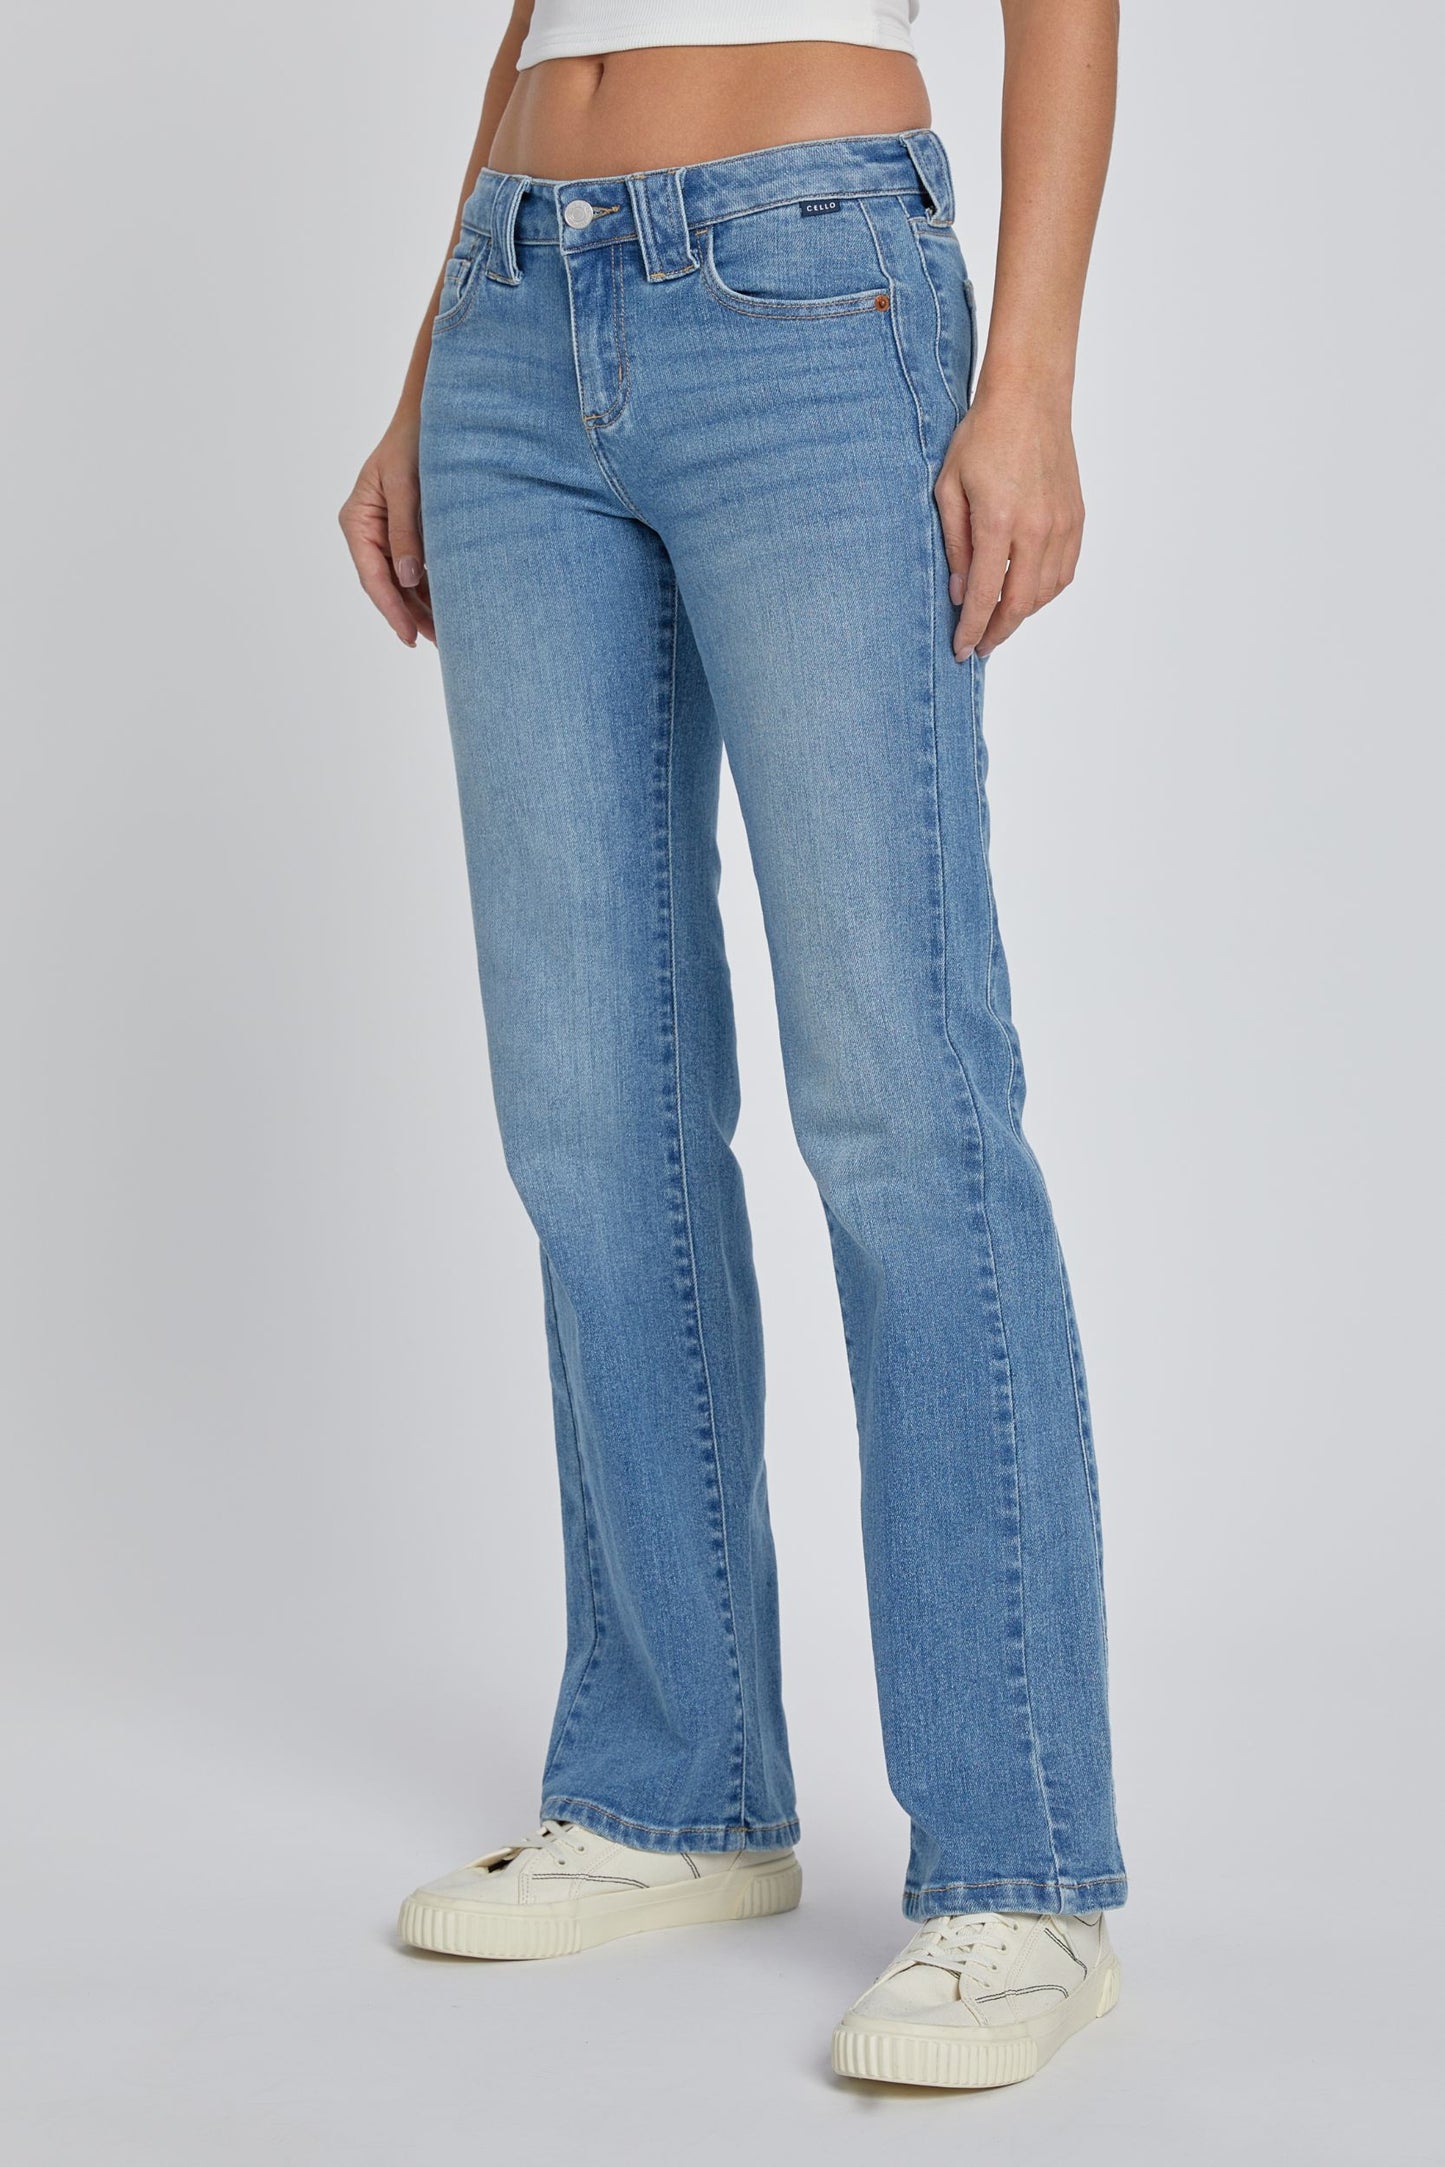 Low Rise Bootcut w/ Double Side Seam Jeans